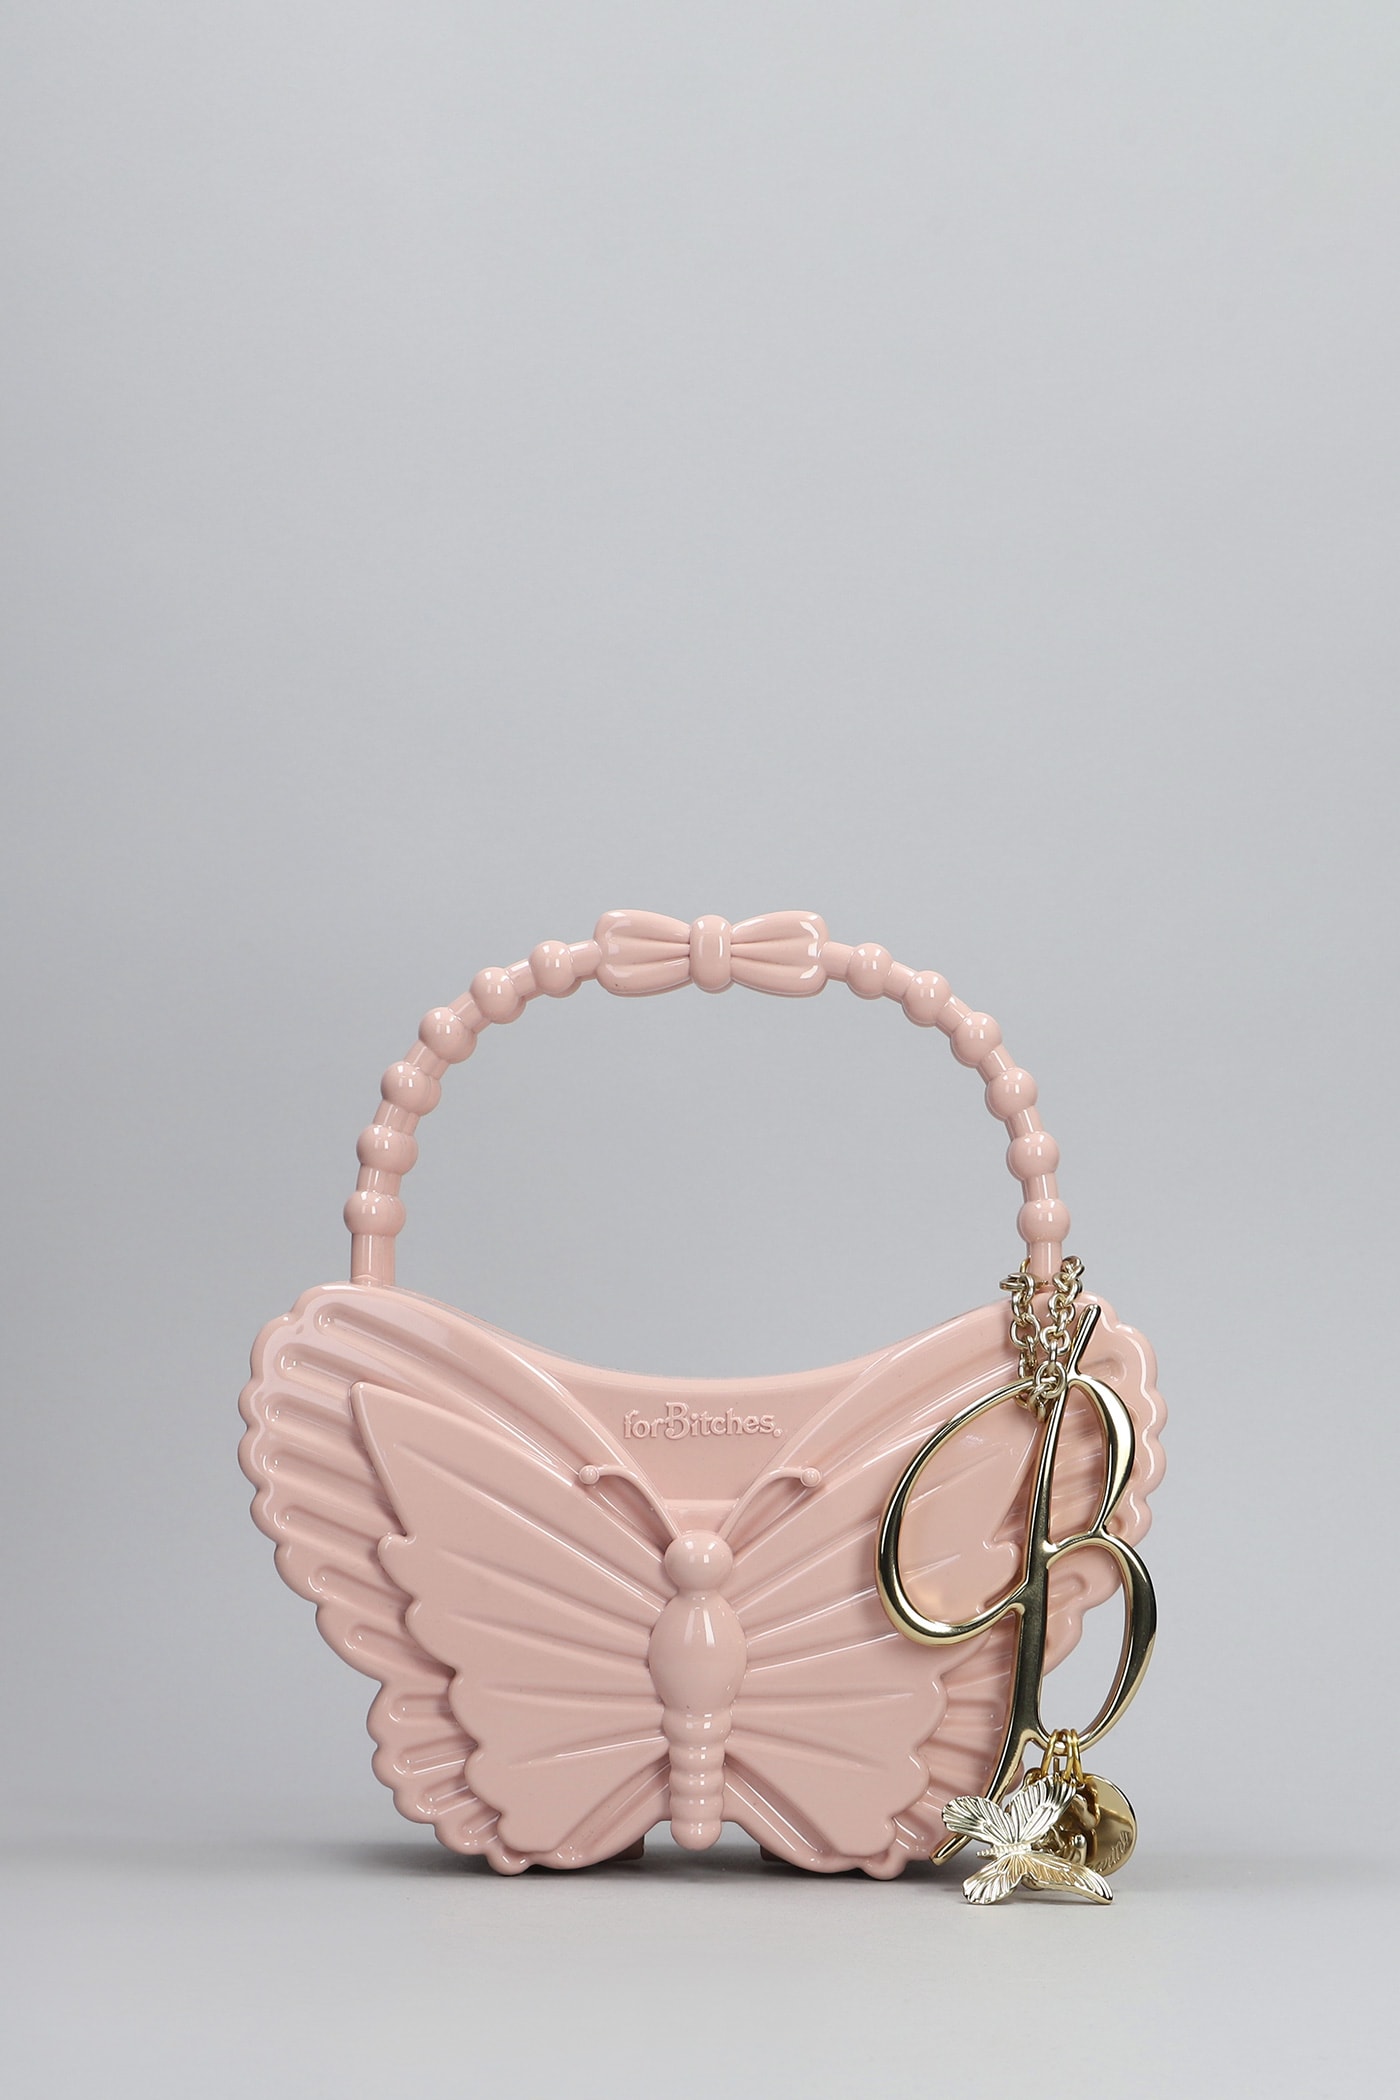 Blumarine Forbitches X  Top Handle Bag In Rose-pink